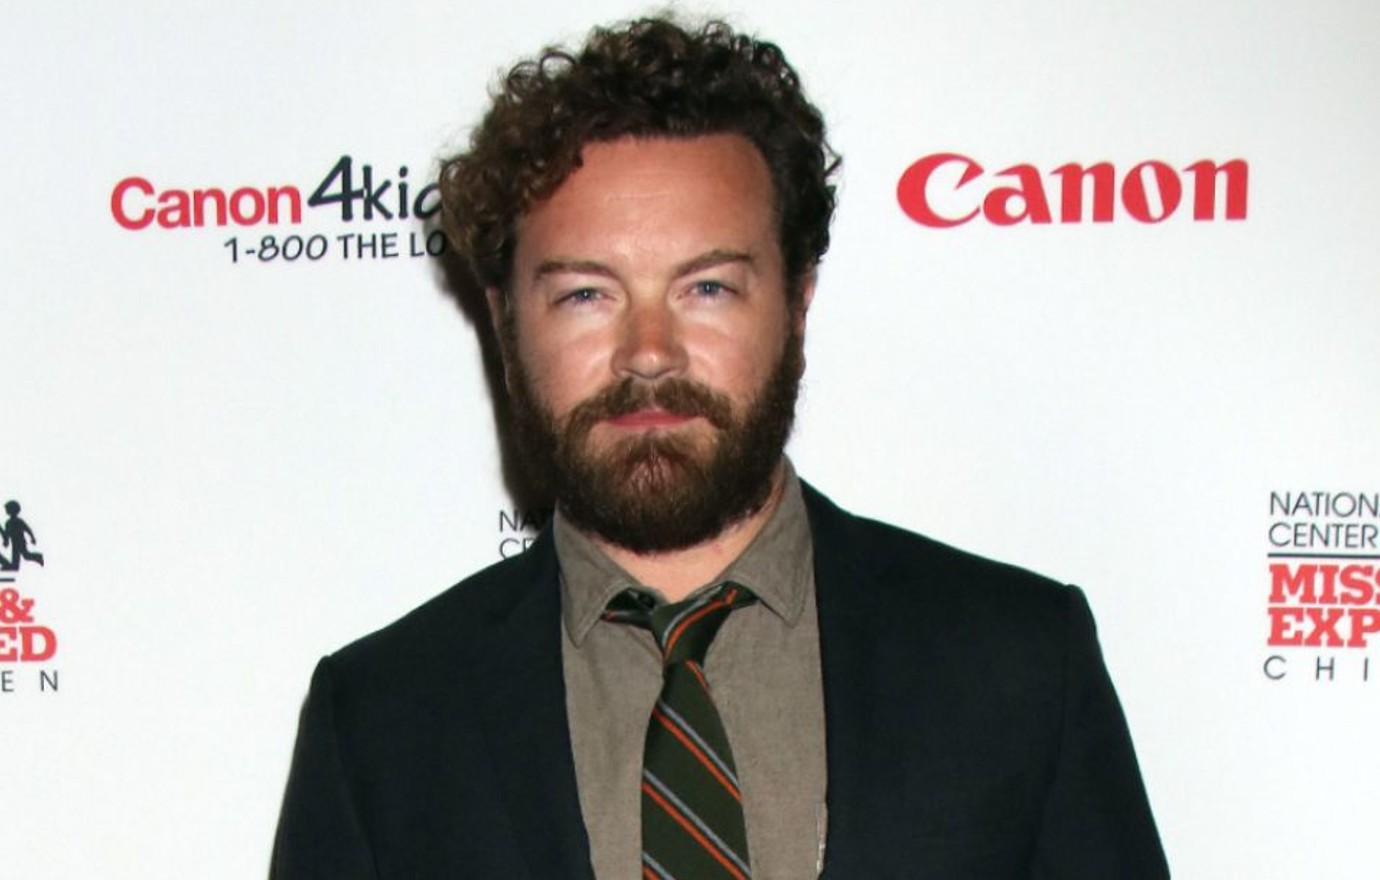 Leah Remini Speaks Out After “Dangerous” Danny Masterson Is Sentenced to 30 Years in Prison